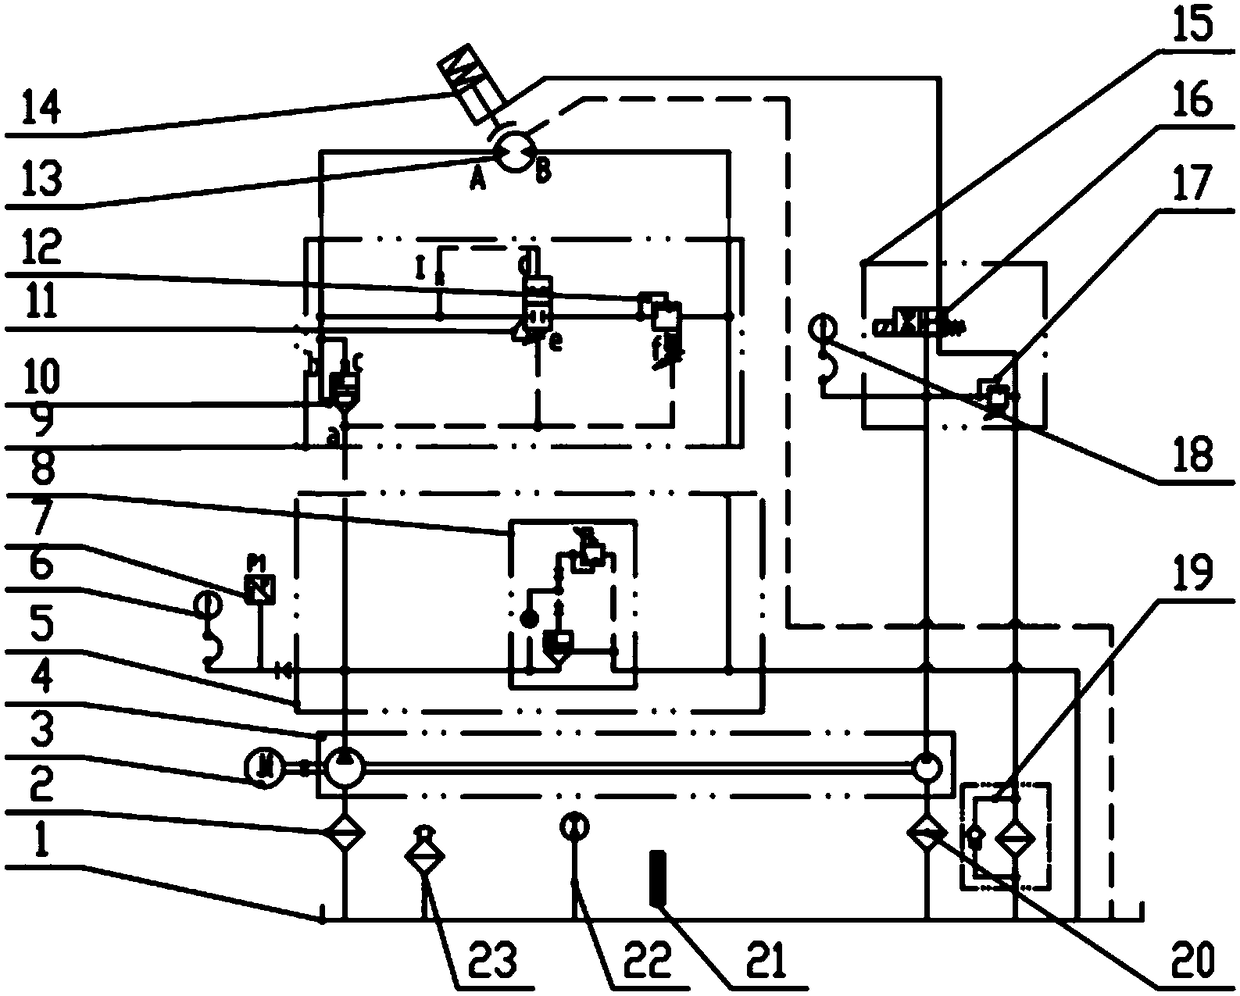 A hydraulic control system of automatic tensioning and free-releasing rope winch